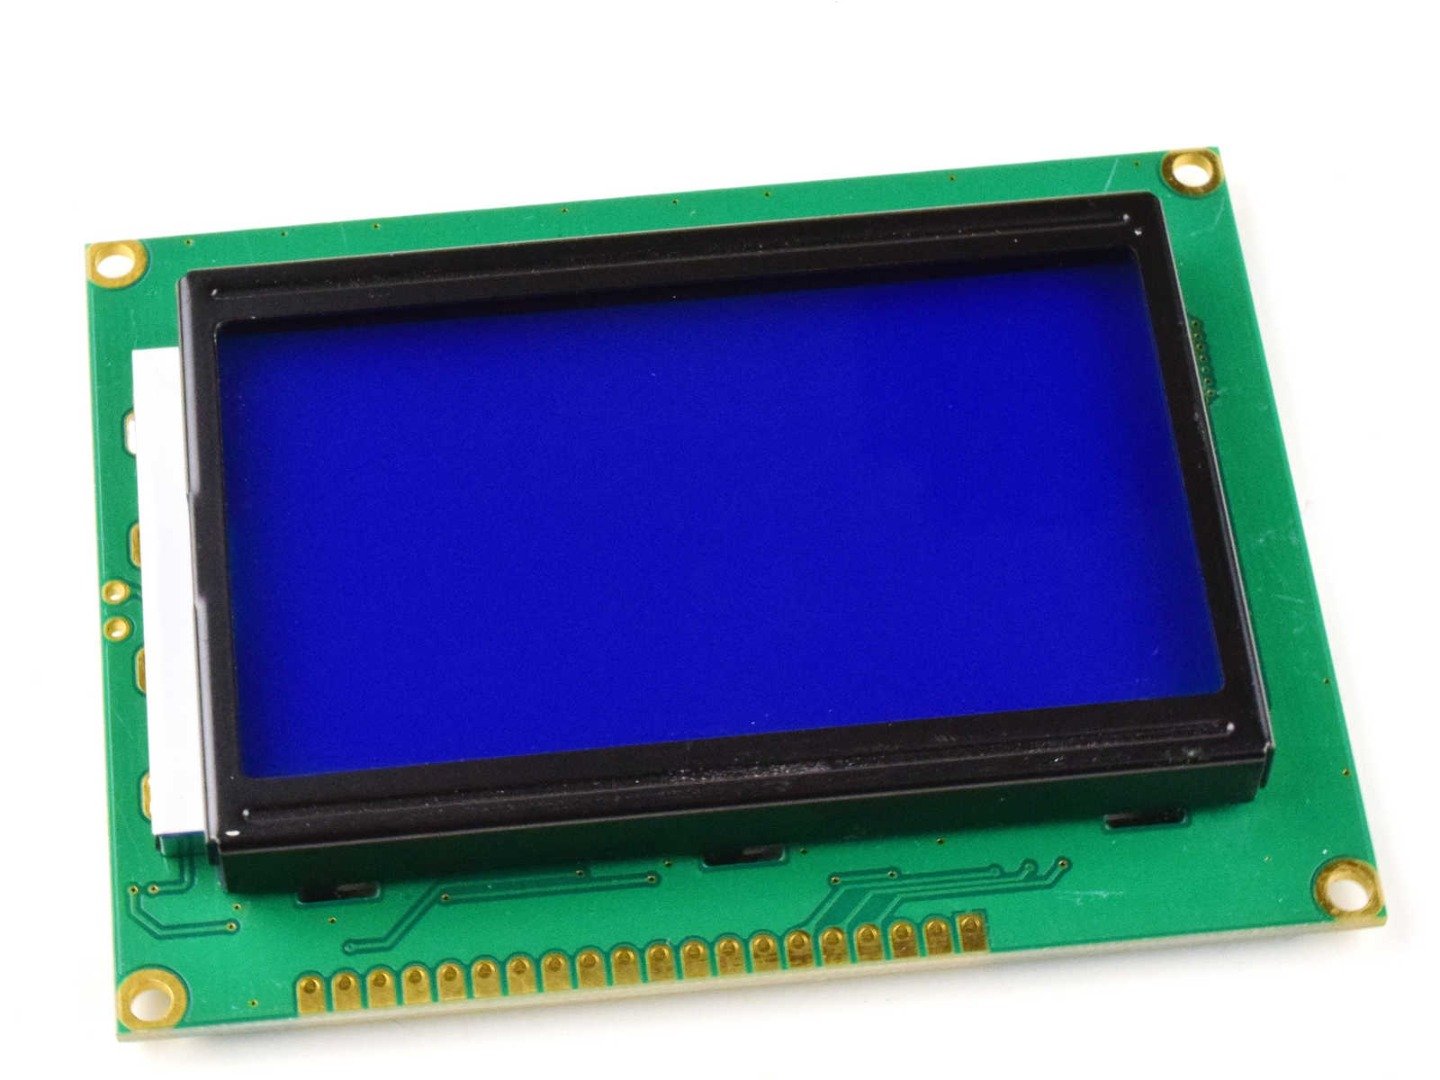 LCD12864 128×64 Graphic Display, blue/white, ST7920 4